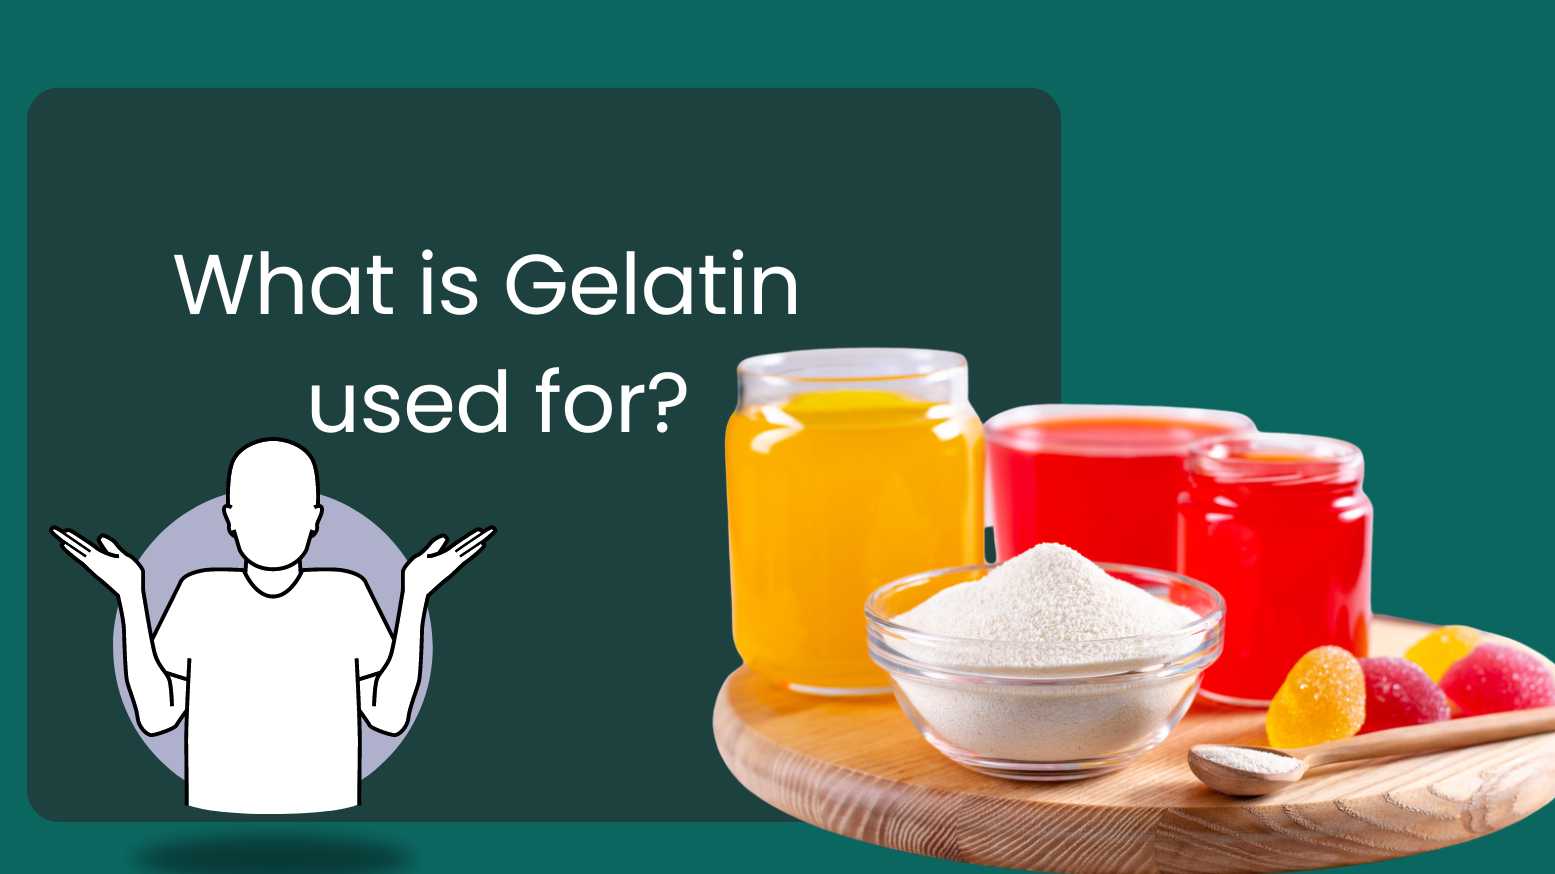 What is gelatin used for